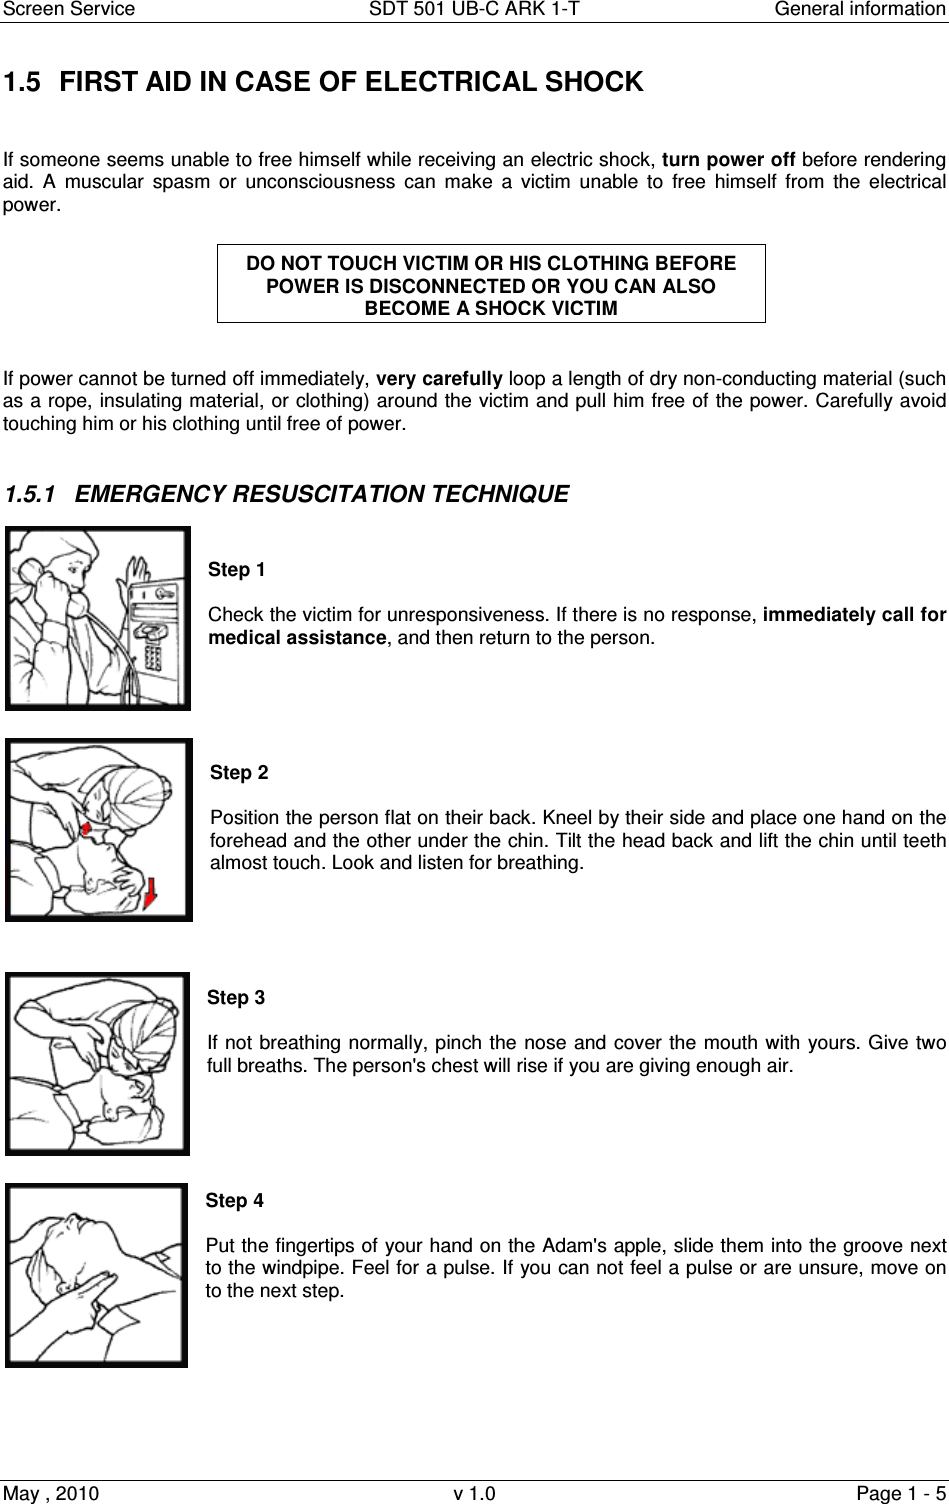 Screen Service  SDT 501 UB-C ARK 1-T  General information May , 2010  v 1.0  Page 1 - 5 1.5  FIRST AID IN CASE OF ELECTRICAL SHOCK   If someone seems unable to free himself while receiving an electric shock, turn power off before rendering aid.  A  muscular  spasm  or  unconsciousness  can  make  a  victim  unable  to  free  himself  from  the  electrical power.    If power cannot be turned off immediately, very carefully loop a length of dry non-conducting material (such as a rope, insulating material, or clothing) around the victim and pull him free of the power. Carefully avoid touching him or his clothing until free of power.  1.5.1  EMERGENCY RESUSCITATION TECHNIQUE   Step 1  Check the victim for unresponsiveness. If there is no response, immediately call for medical assistance, and then return to the person.      Step 2   Position the person flat on their back. Kneel by their side and place one hand on the forehead and the other under the chin. Tilt the head back and lift the chin until teeth almost touch. Look and listen for breathing.      Step 3  If not breathing normally, pinch the nose and cover the mouth with yours. Give two full breaths. The person&apos;s chest will rise if you are giving enough air.      Step 4  Put the fingertips of your hand on the Adam&apos;s apple, slide them into the groove next to the windpipe. Feel for a pulse. If you can not feel a pulse or are unsure, move on to the next step.        DO NOT TOUCH VICTIM OR HIS CLOTHING BEFORE POWER IS DISCONNECTED OR YOU CAN ALSO BECOME A SHOCK VICTIM 